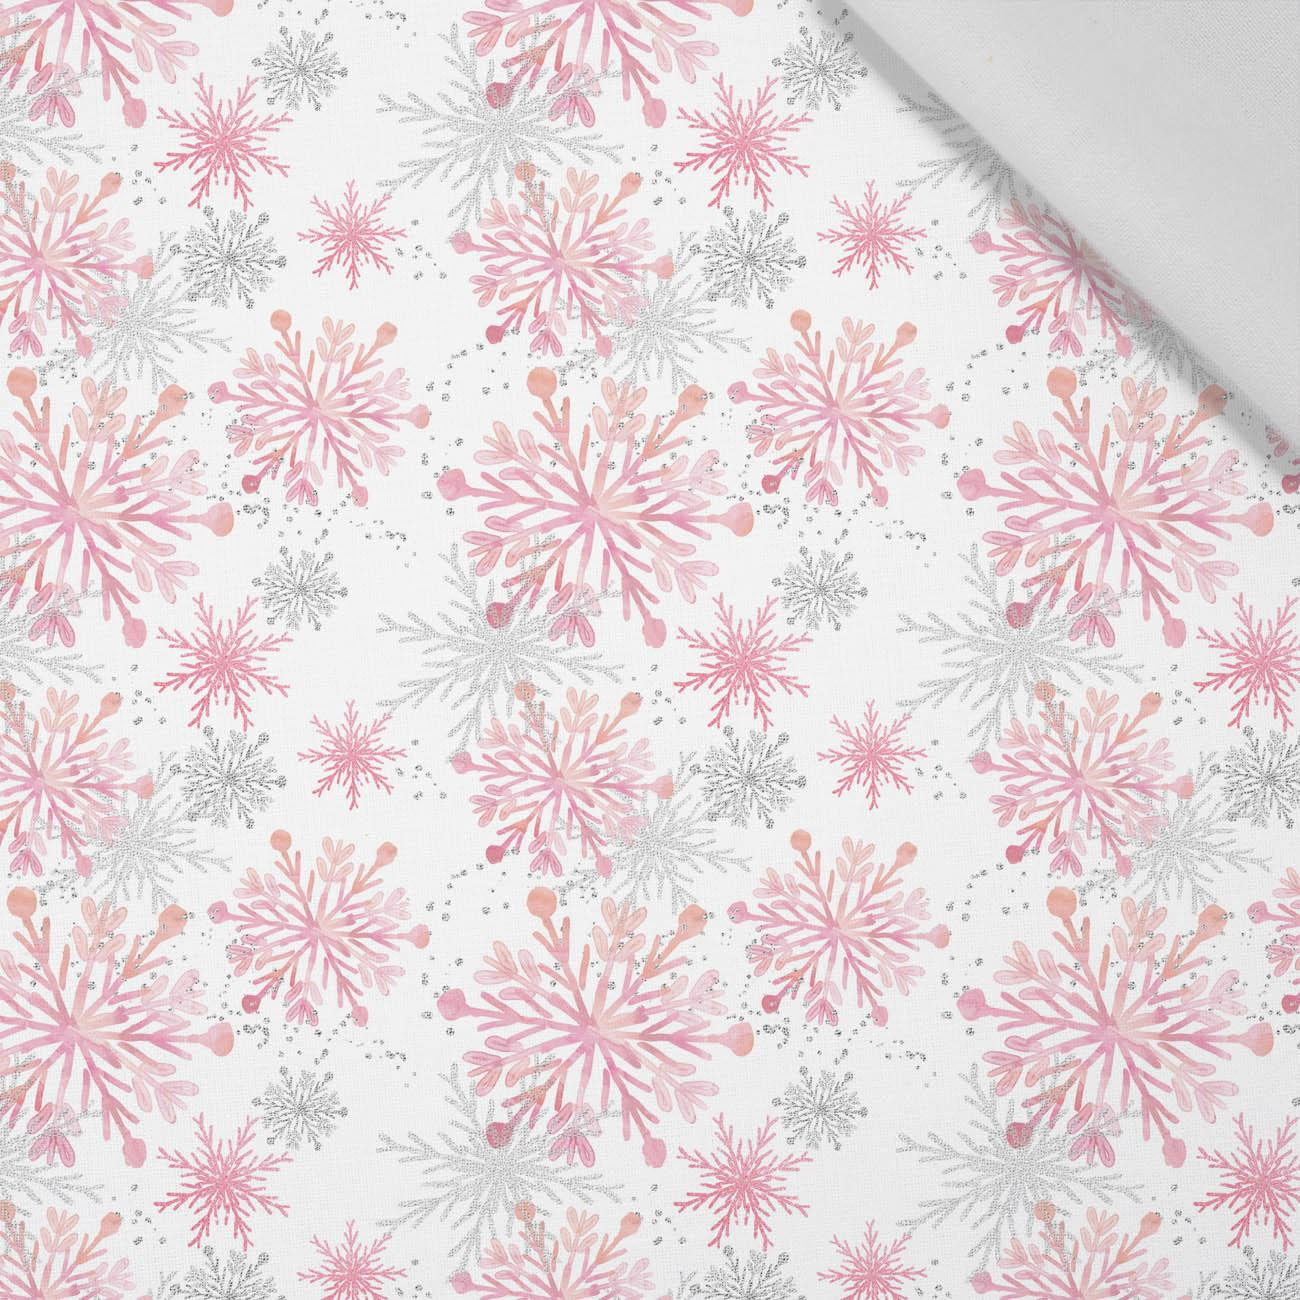 PINK SNOWFLAKES pat. 2 - Cotton woven fabric